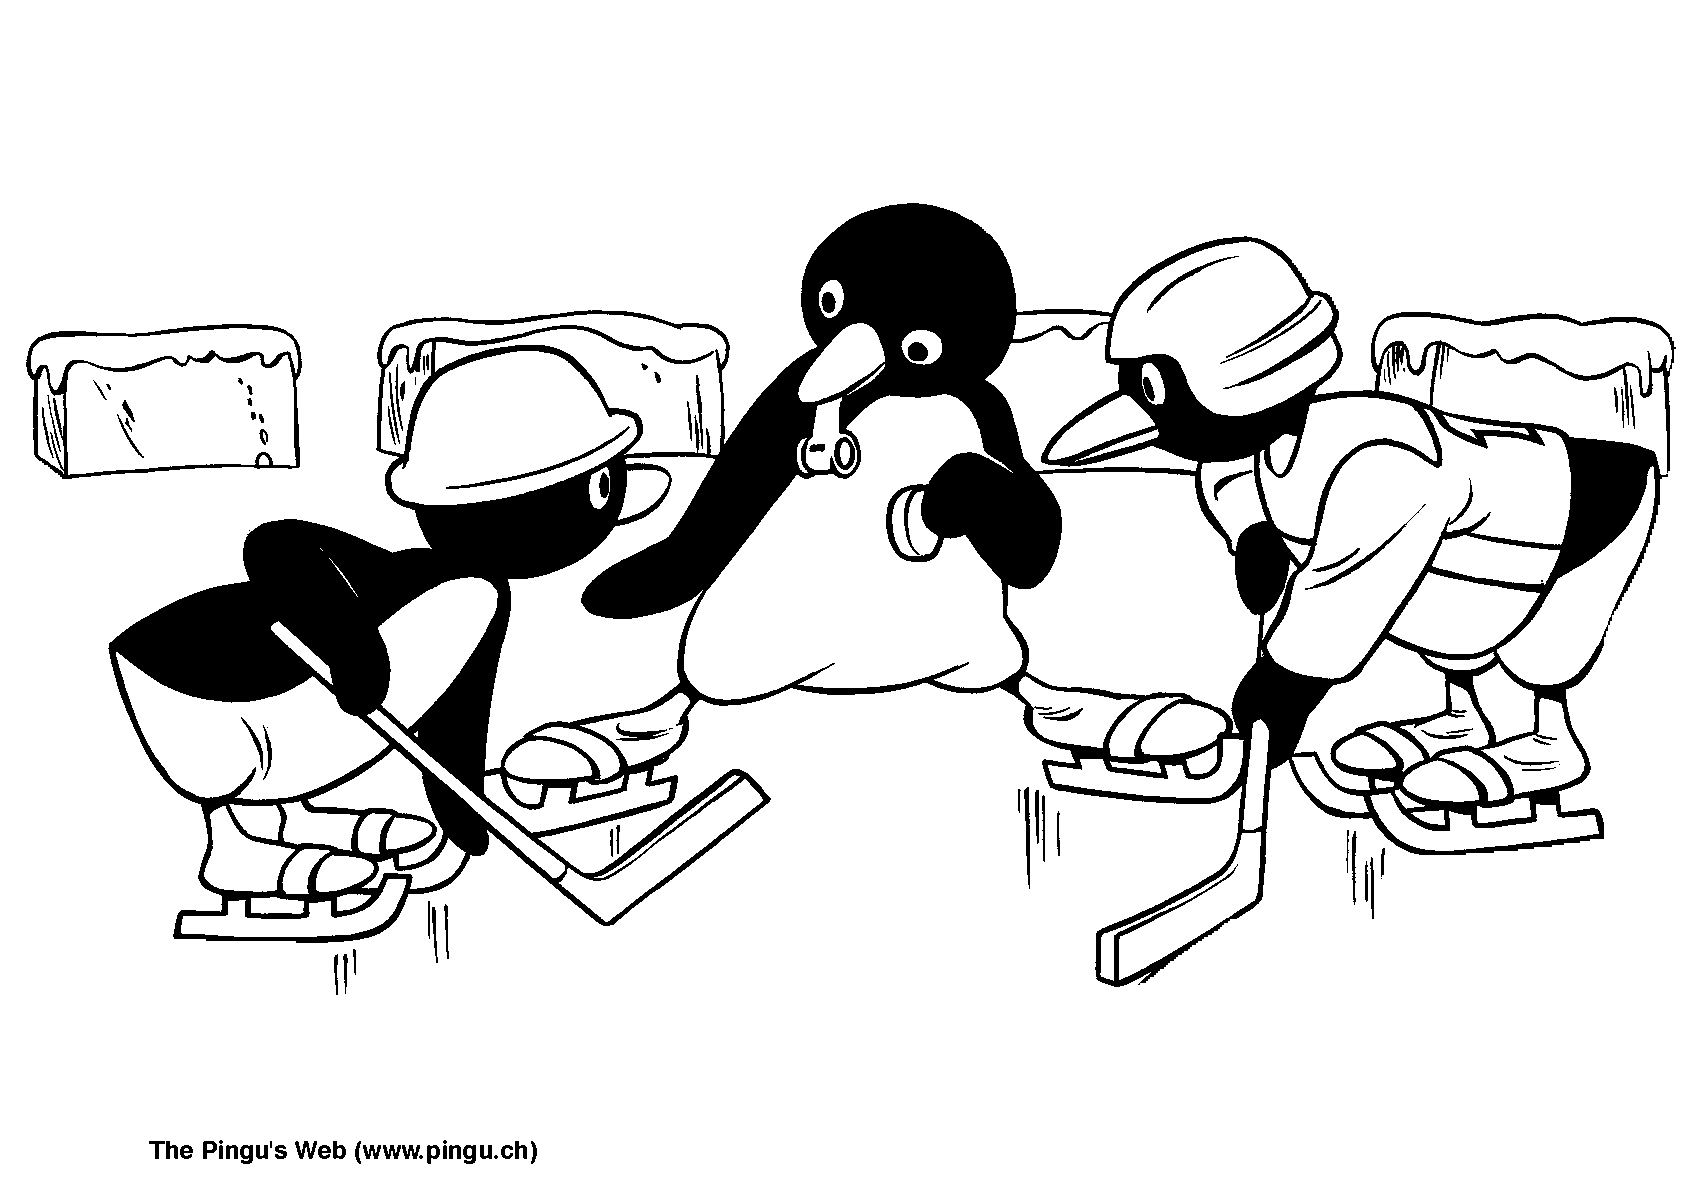 The Pingu Show coloring page